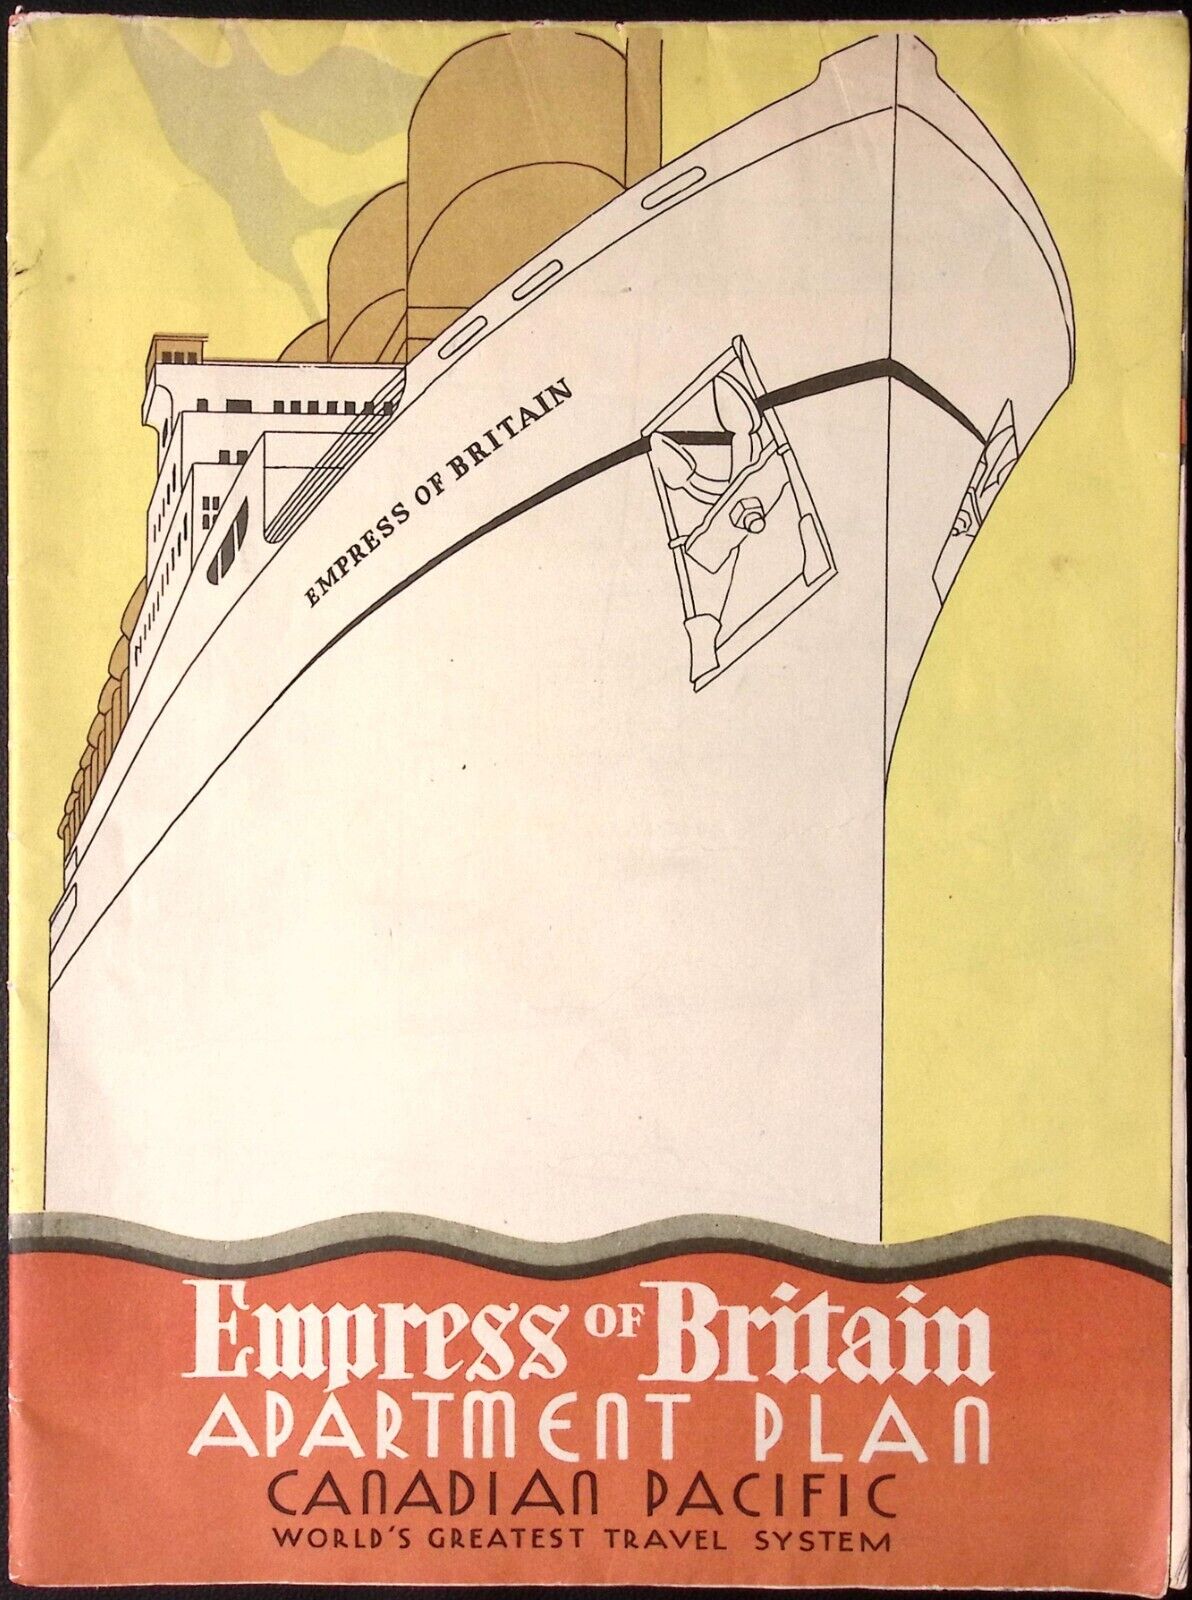 1920s Canadian Pacific Steamship Empress of Britain Apartment Plan Photo Poster